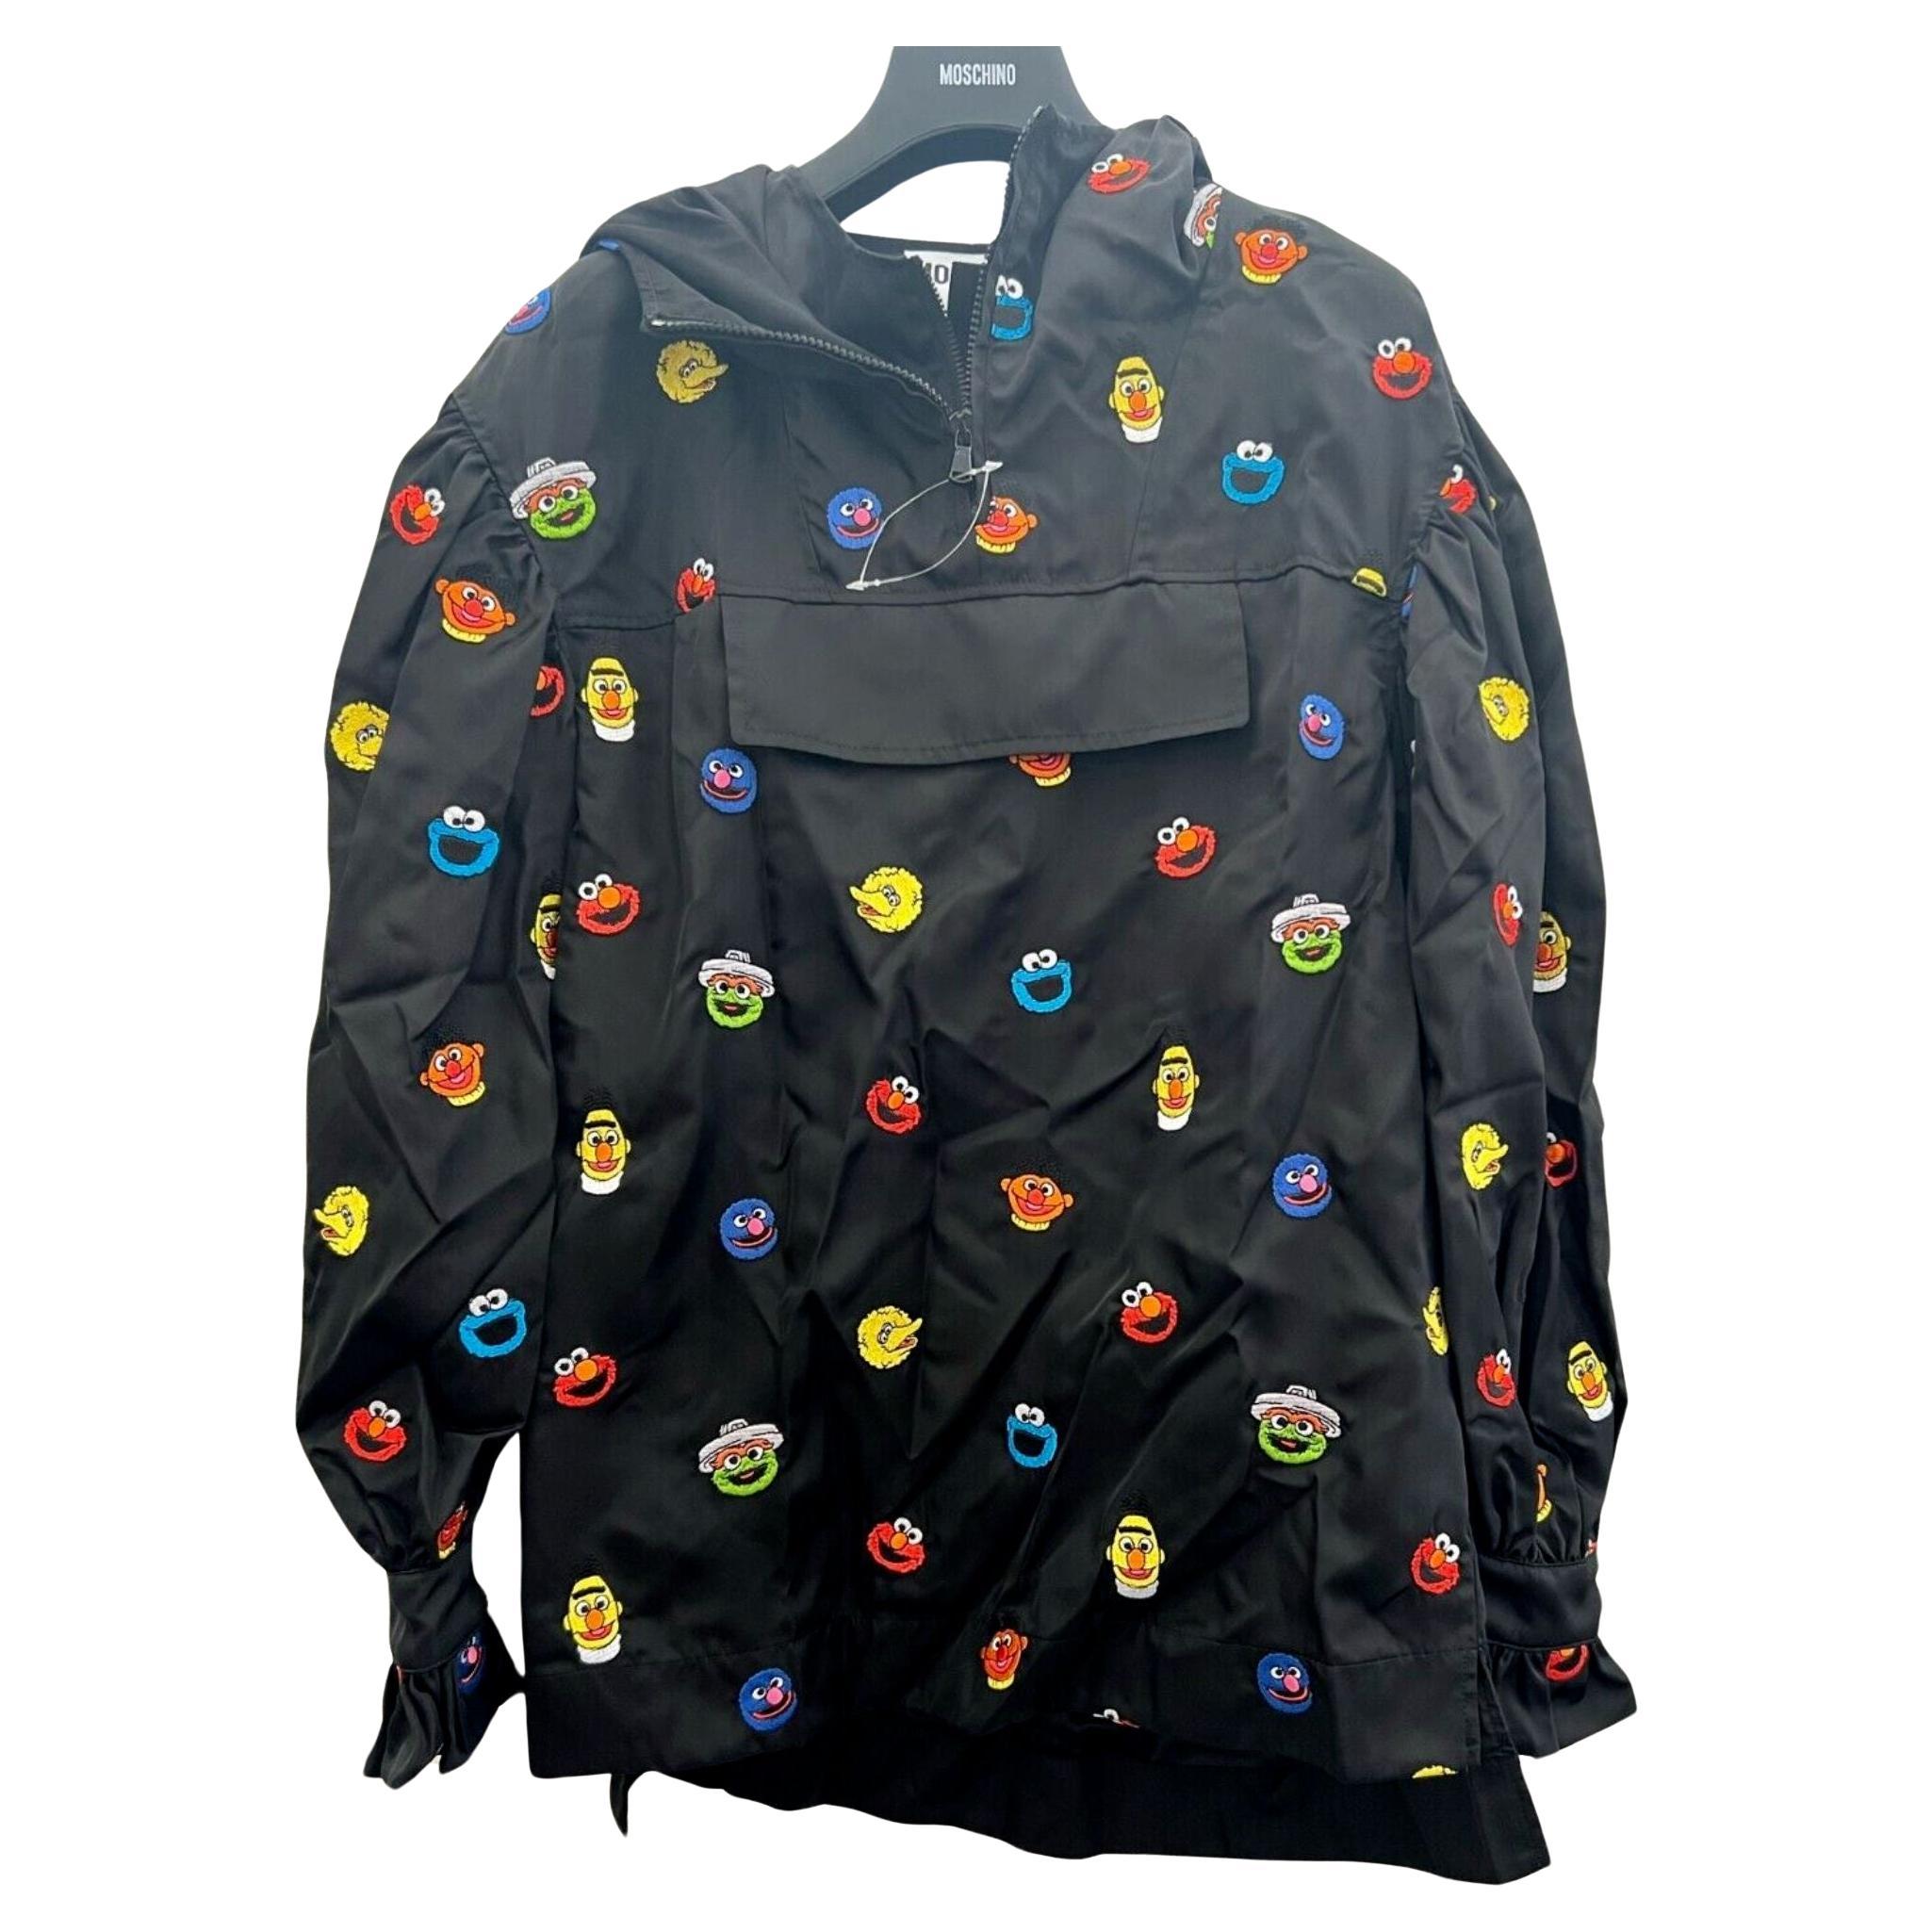 AW21 Moschino Couture Sesame Street Embroidered Hooded Jacket by Jeremy Scott For Sale